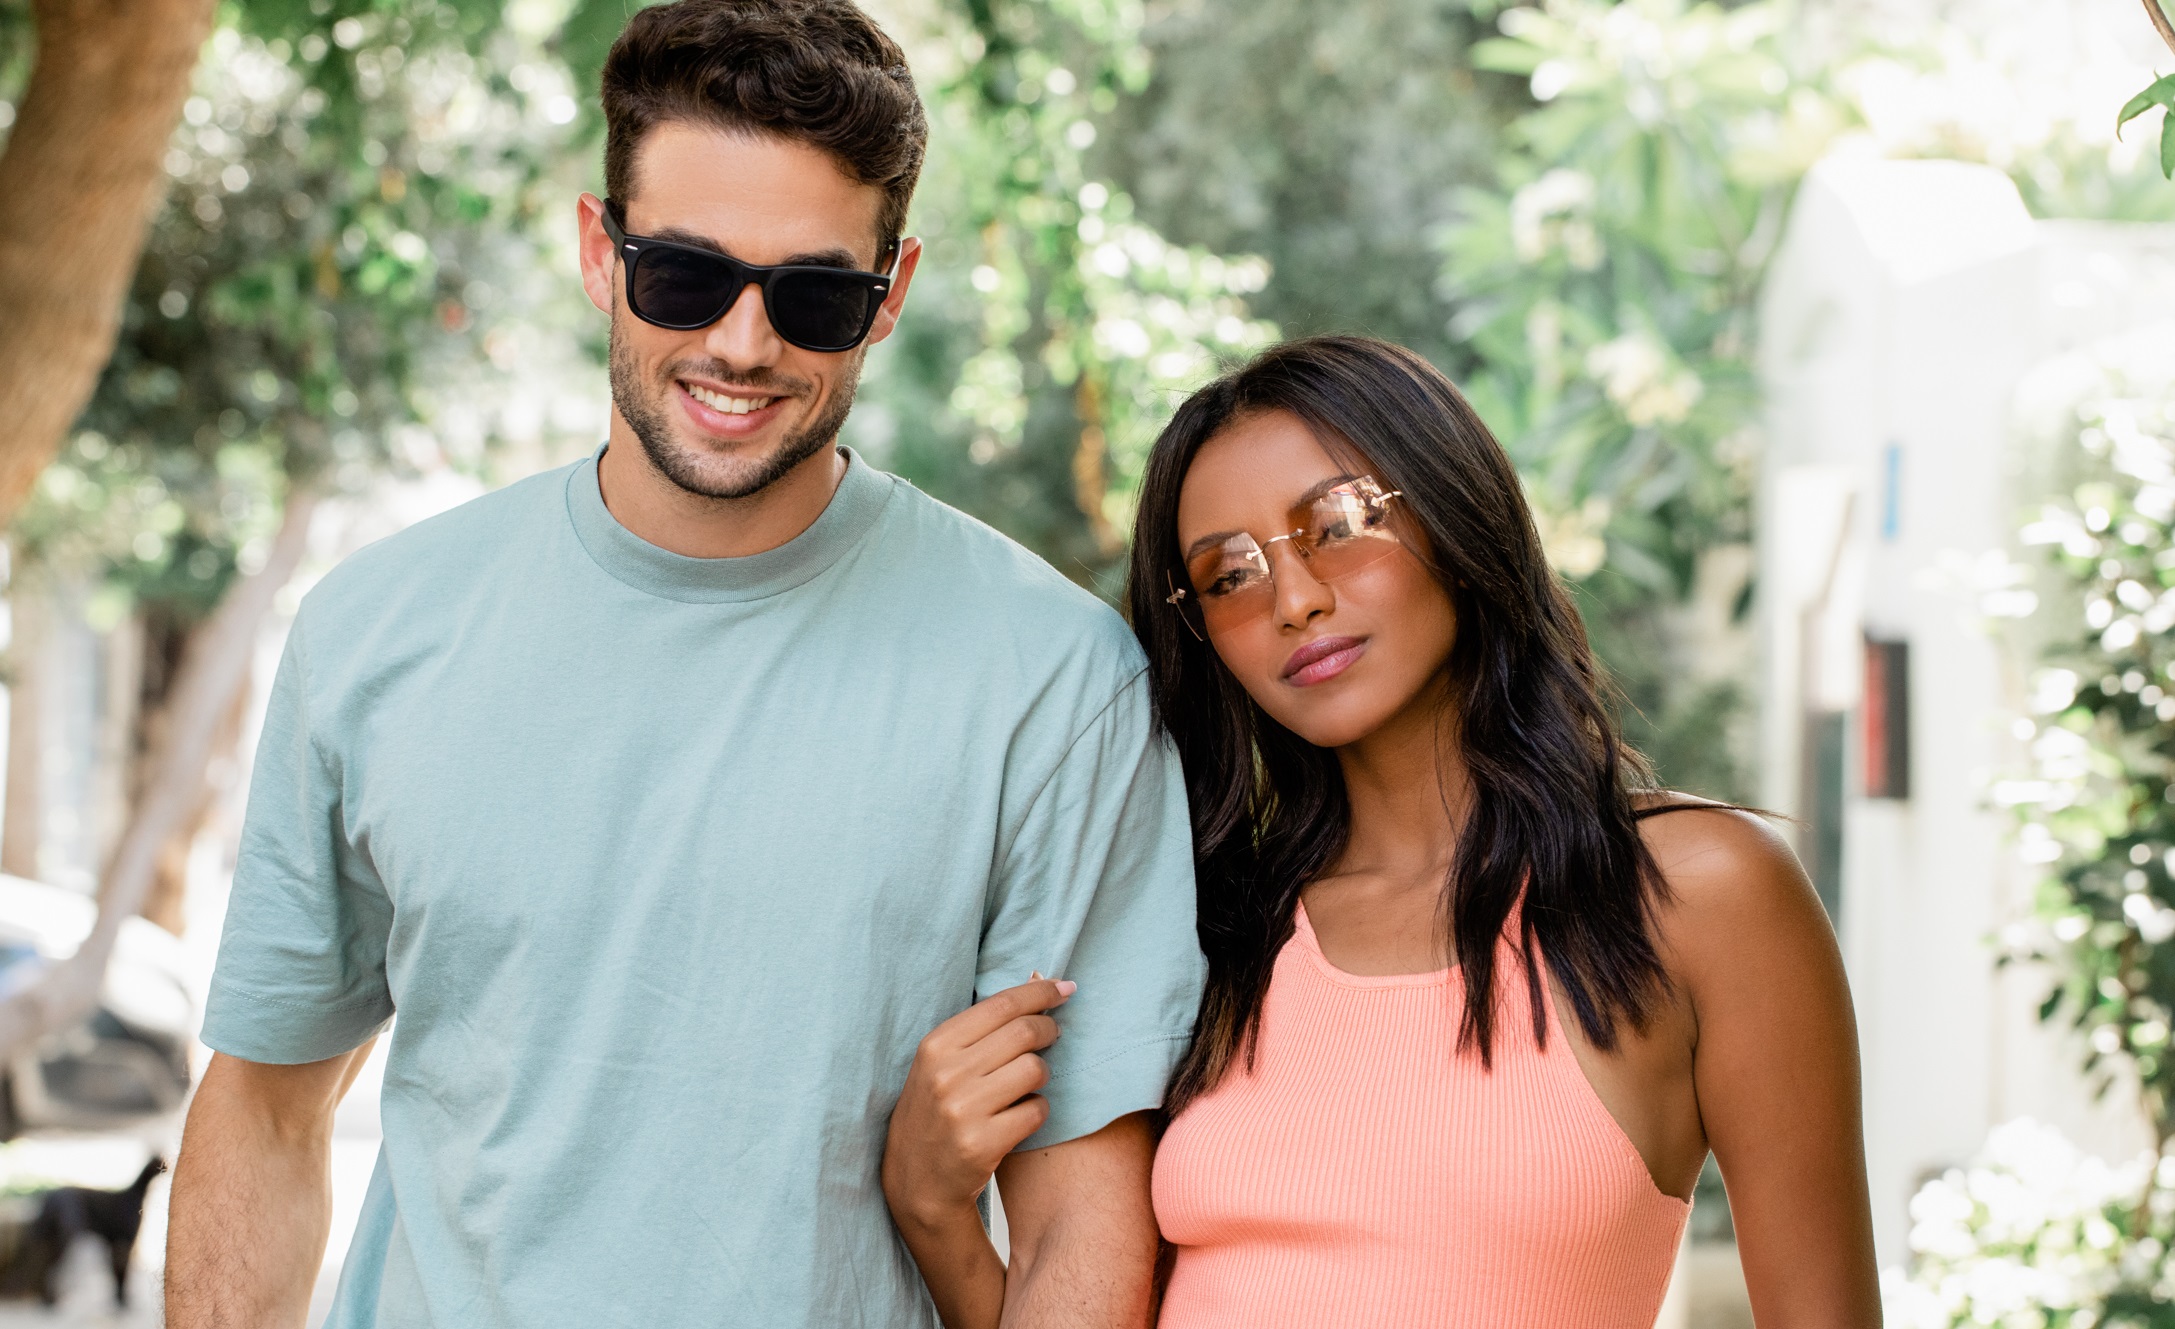 All-in-One Transitions® vs Sunglasses